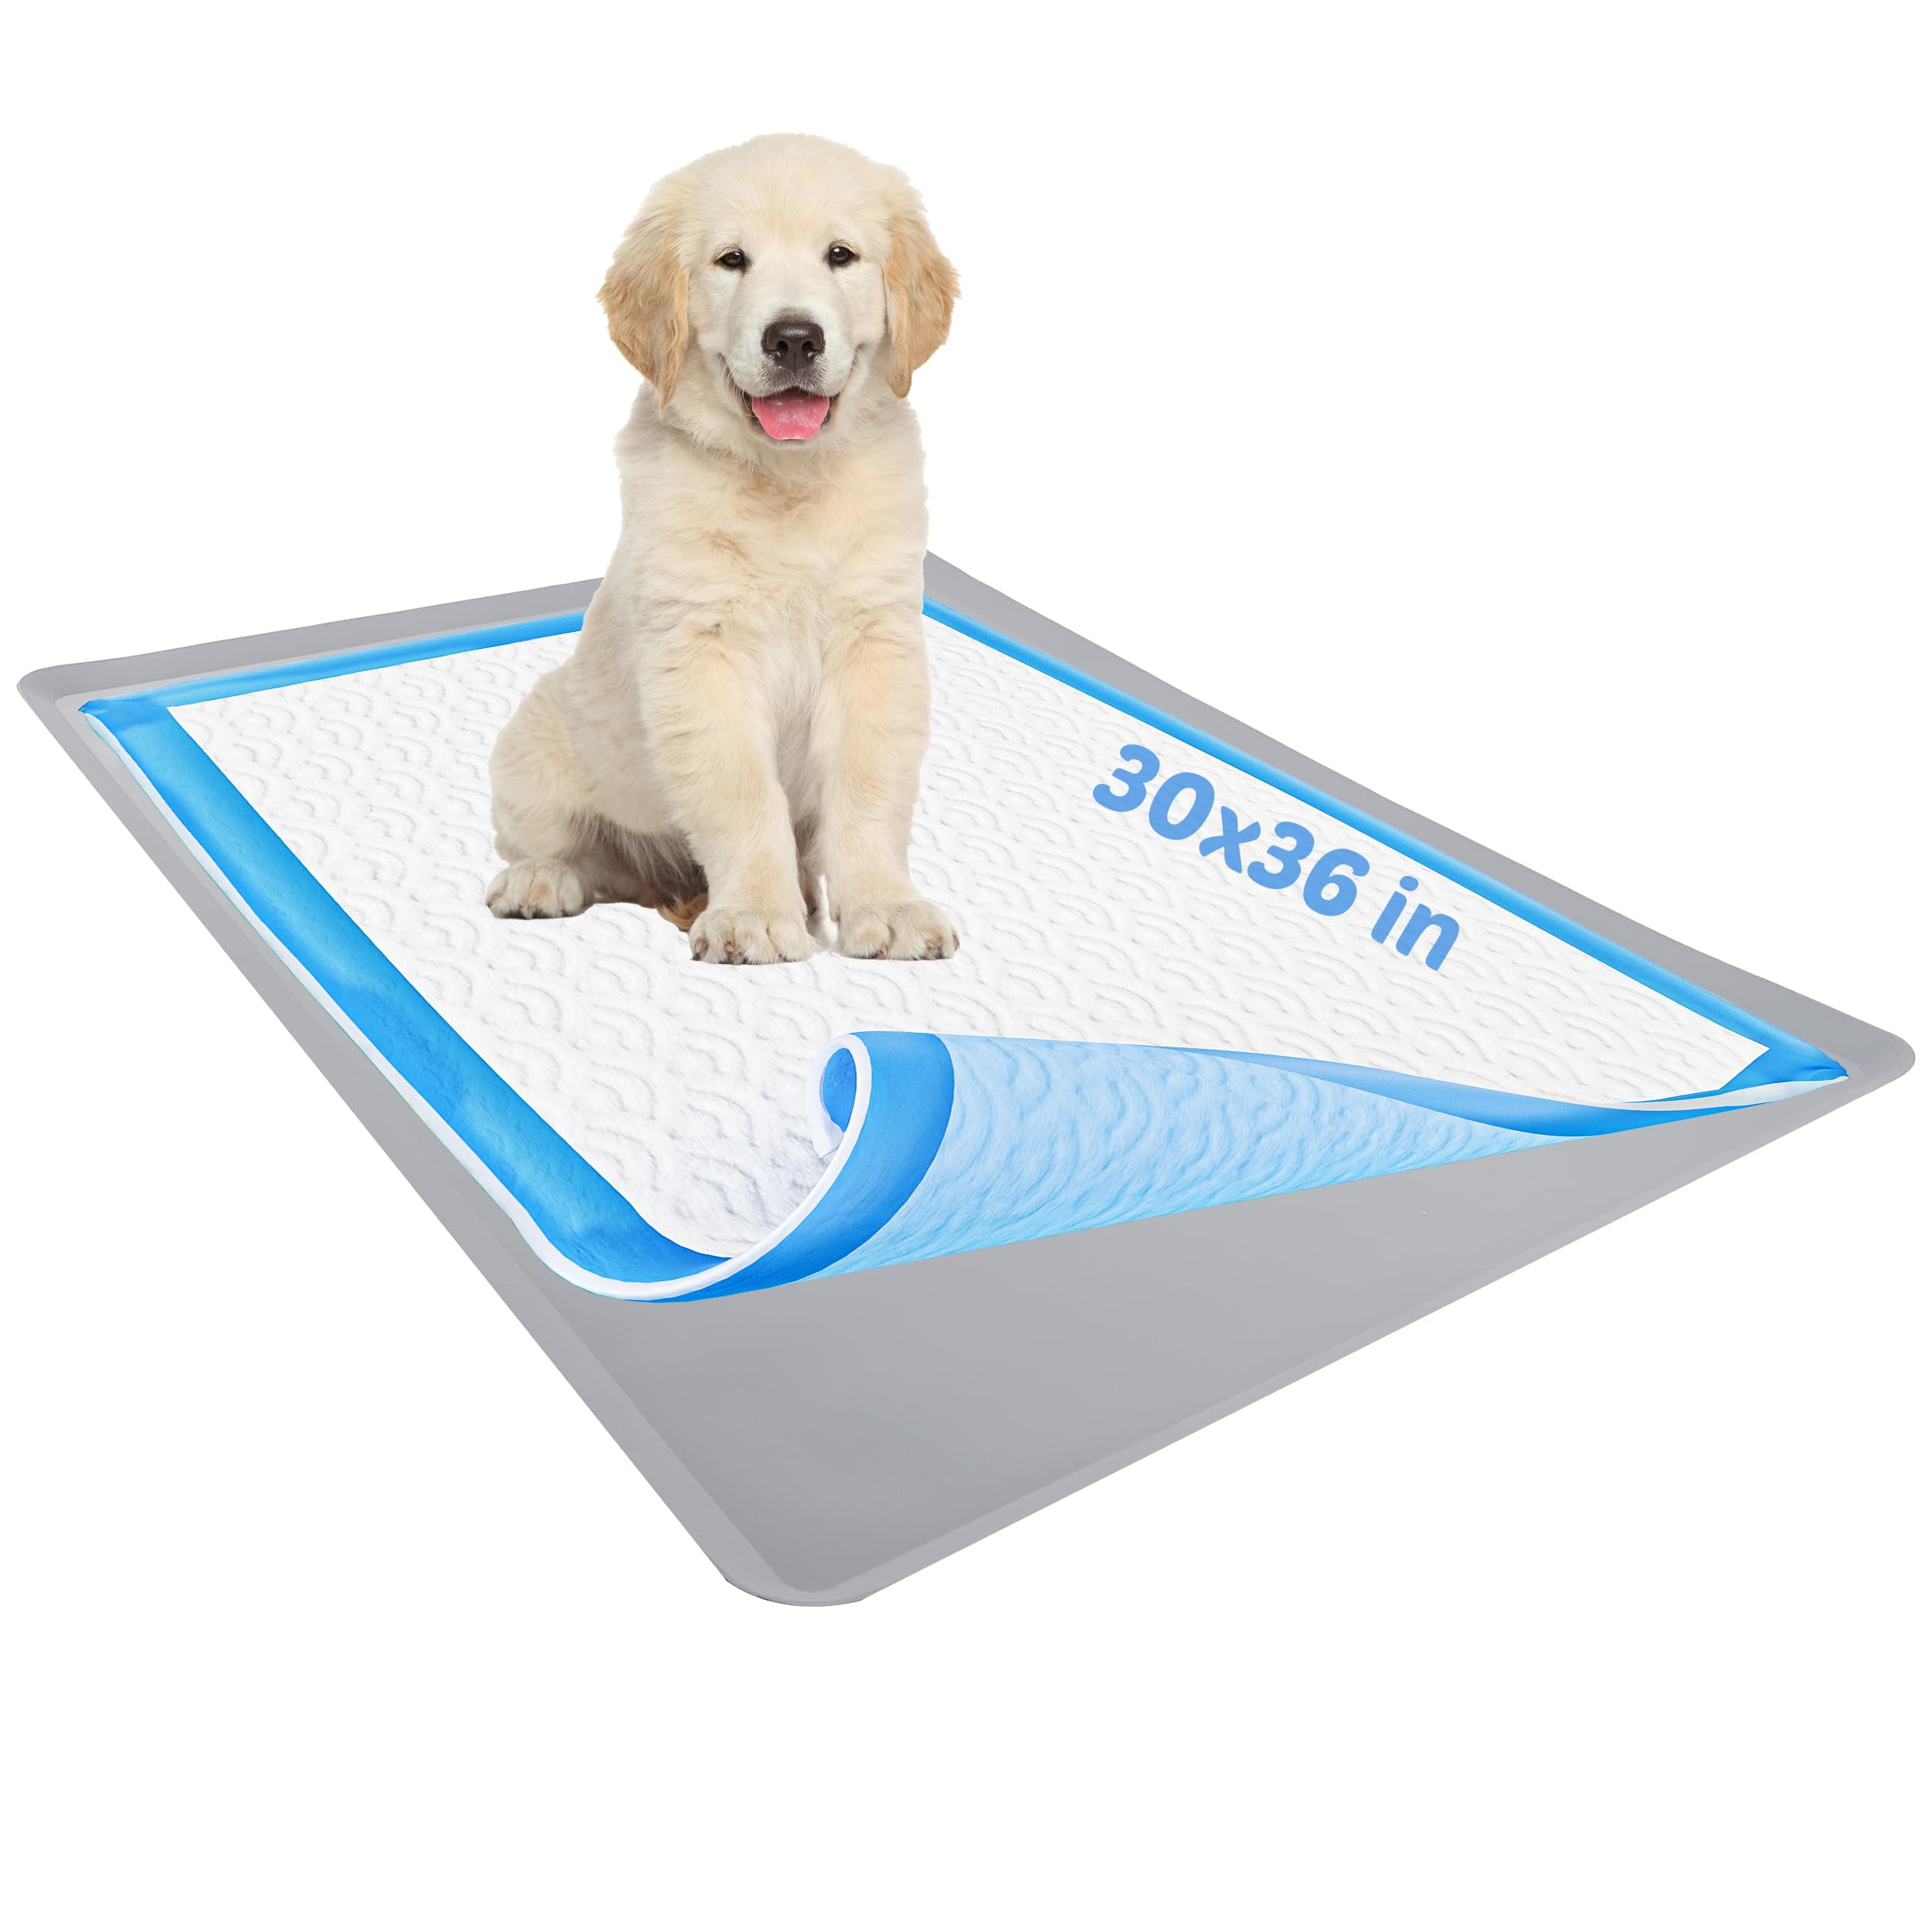 Skywin Pee Pad Holder - No Spill and Leaks Silicone Puppy Pad Holder, Secure30 x 23 Inches Pee Pad, Beige